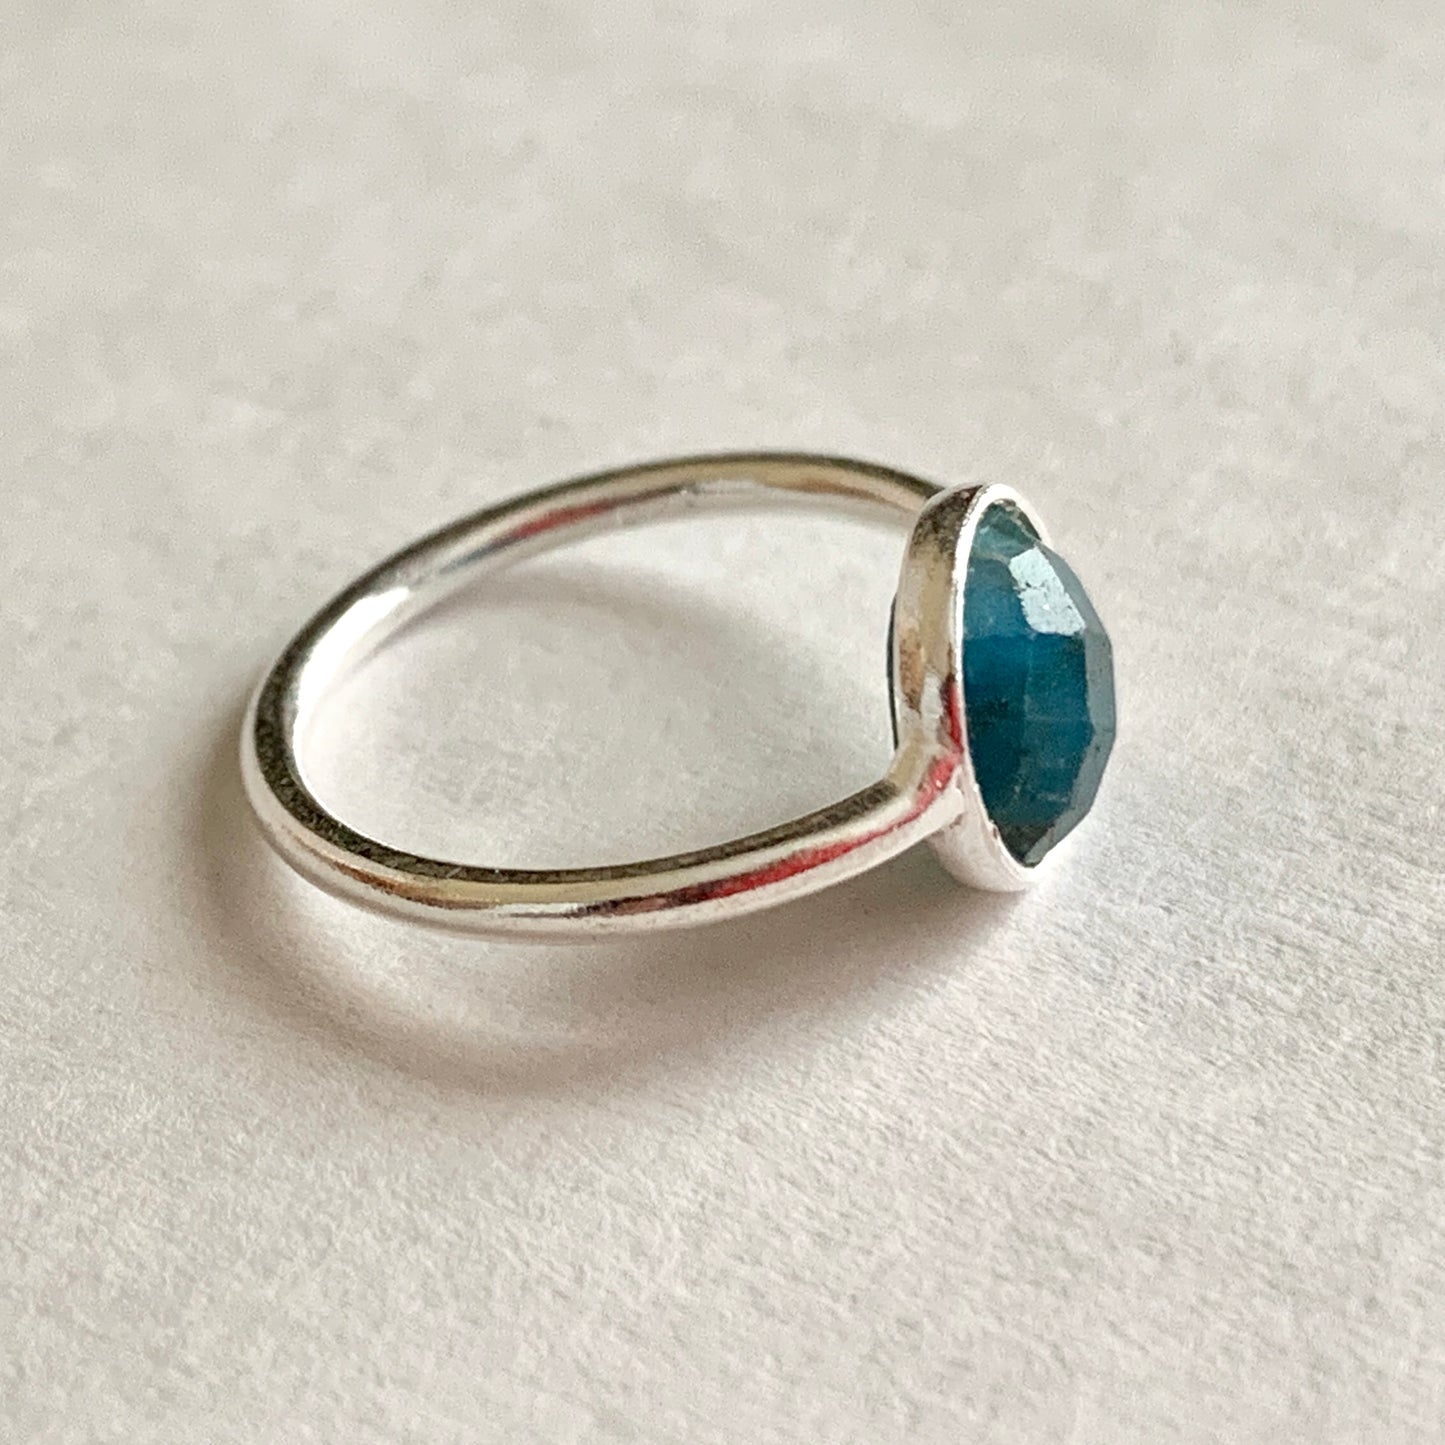 Apatite Ring, Sterling Silver